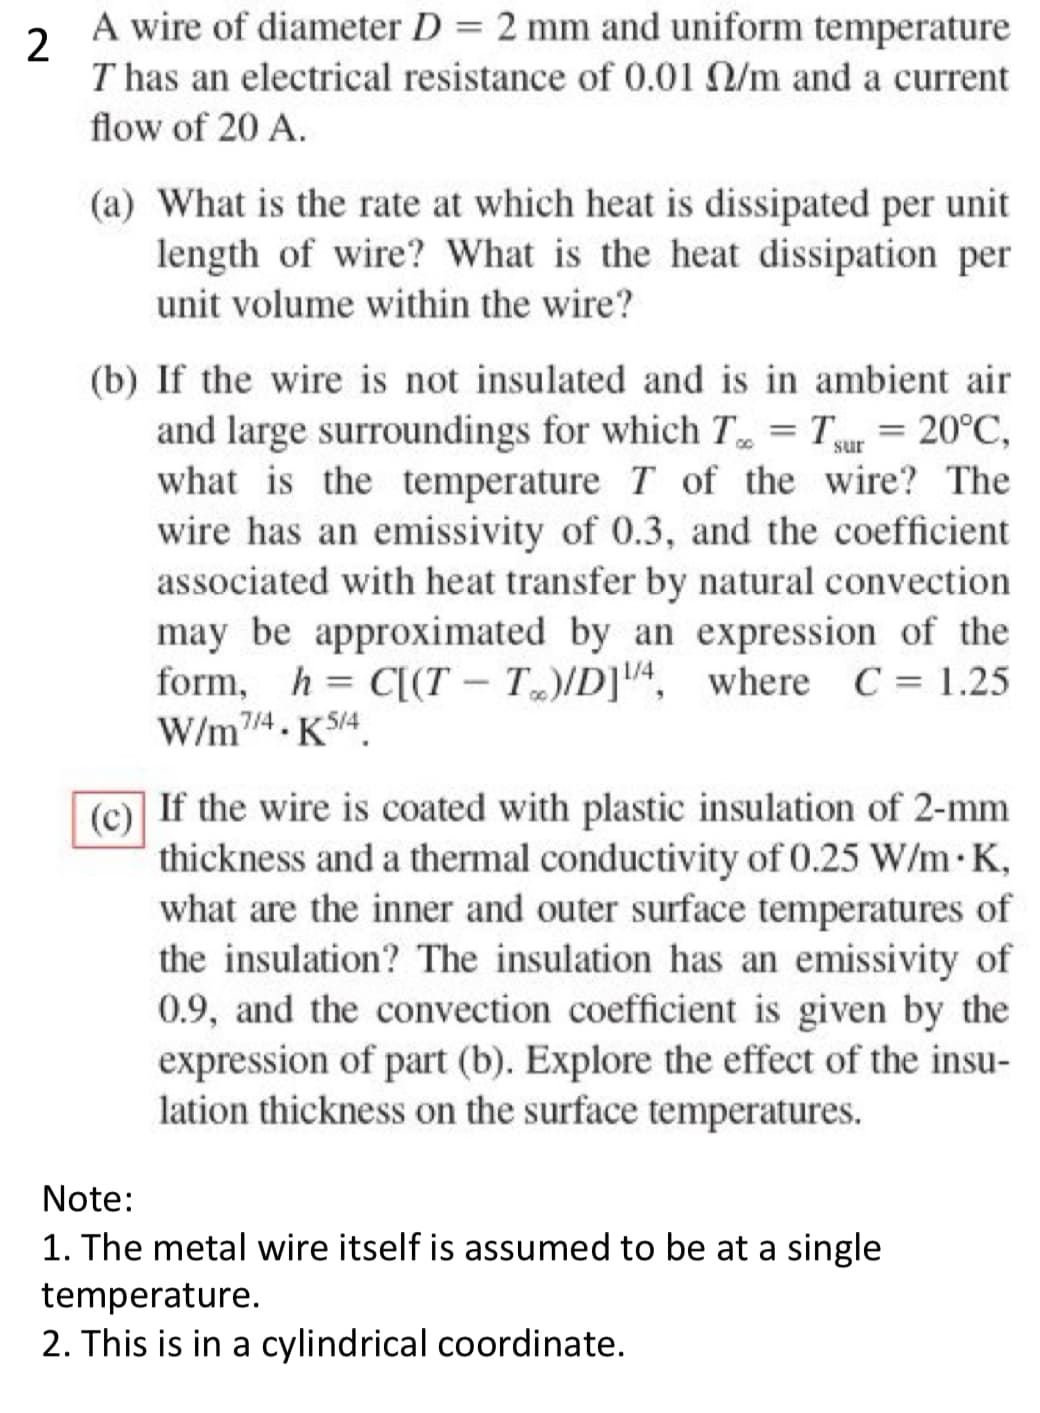 2
A wire of diameter D = 2 mm and uniform temperature
T has an electrical resistance of 0.01 N/m and a current
flow of 20 A.
(a) What is the rate at which heat is dissipated per unit
length of wire? What is the heat dissipation per
unit volume within the wire?
(b) If the wire is not insulated and is in ambient air
and large surroundings for which T = Tsur = 20°C,
what is the temperature T of the wire? The
wire has an emissivity of 0.3, and the coefficient
associated with heat transfer by natural convection
may be approximated by an expression of the
form, h = C[(T-T)/D]¹/4, where C = 1.25
W/m7/4.K5/4
(c)
If the wire is coated with plastic insulation of 2-mm
thickness and a thermal conductivity of 0.25 W/m.K,
what are the inner and outer surface temperatures of
the insulation? The insulation has an emissivity of
0.9, and the convection coefficient is given by the
expression of part (b). Explore the effect of the insu-
lation thickness on the surface temperatures.
Note:
1. The metal wire itself is assumed to be at a single
temperature.
2. This is in a cylindrical coordinate.